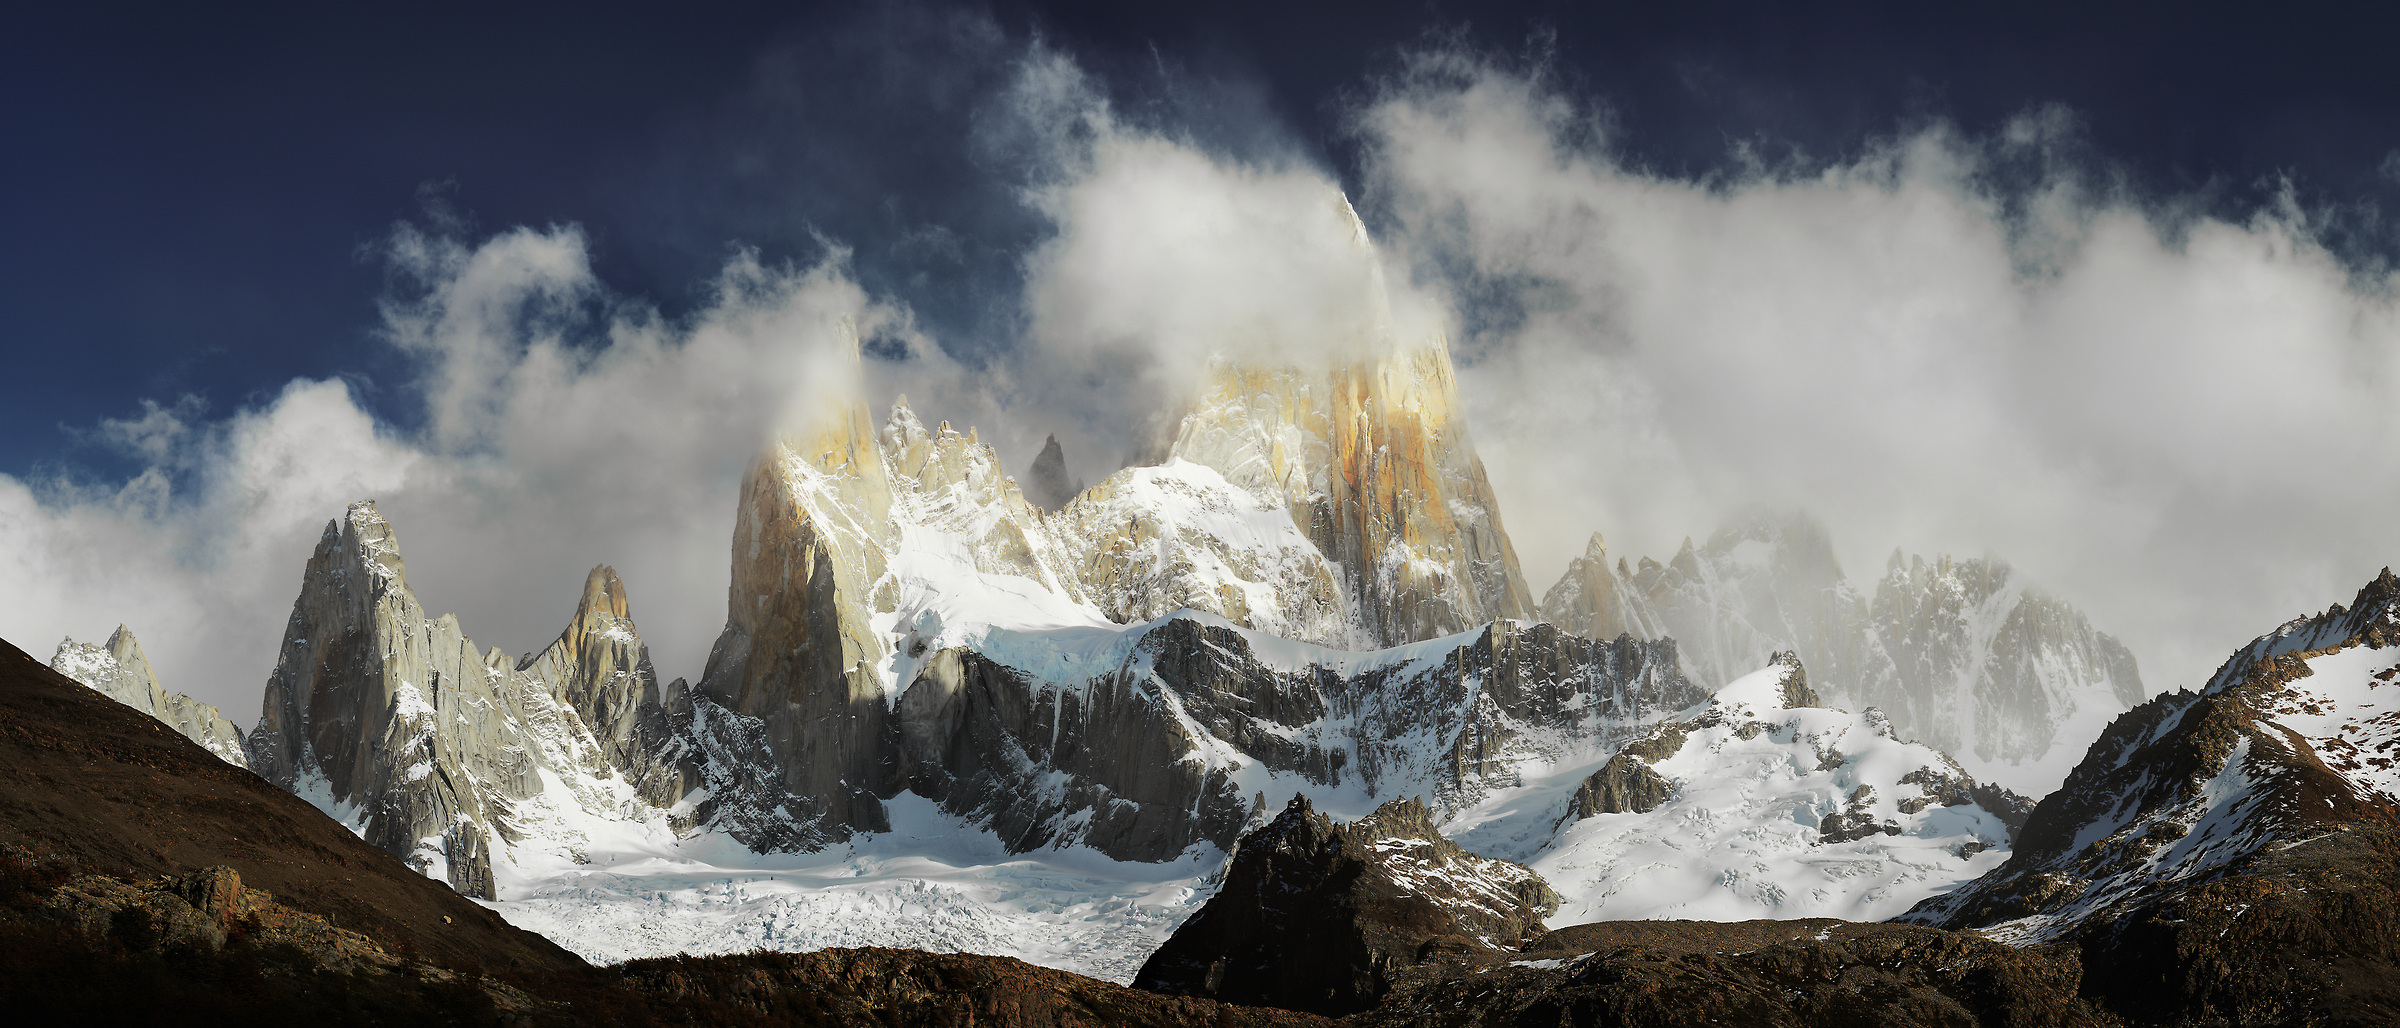 192 megapixels! A very high resolution, large-format VAST photo of a Patagonia mountain landscape; fine art print created by Alexandre Deschaumes in El chalten, Argentina, Patagonia